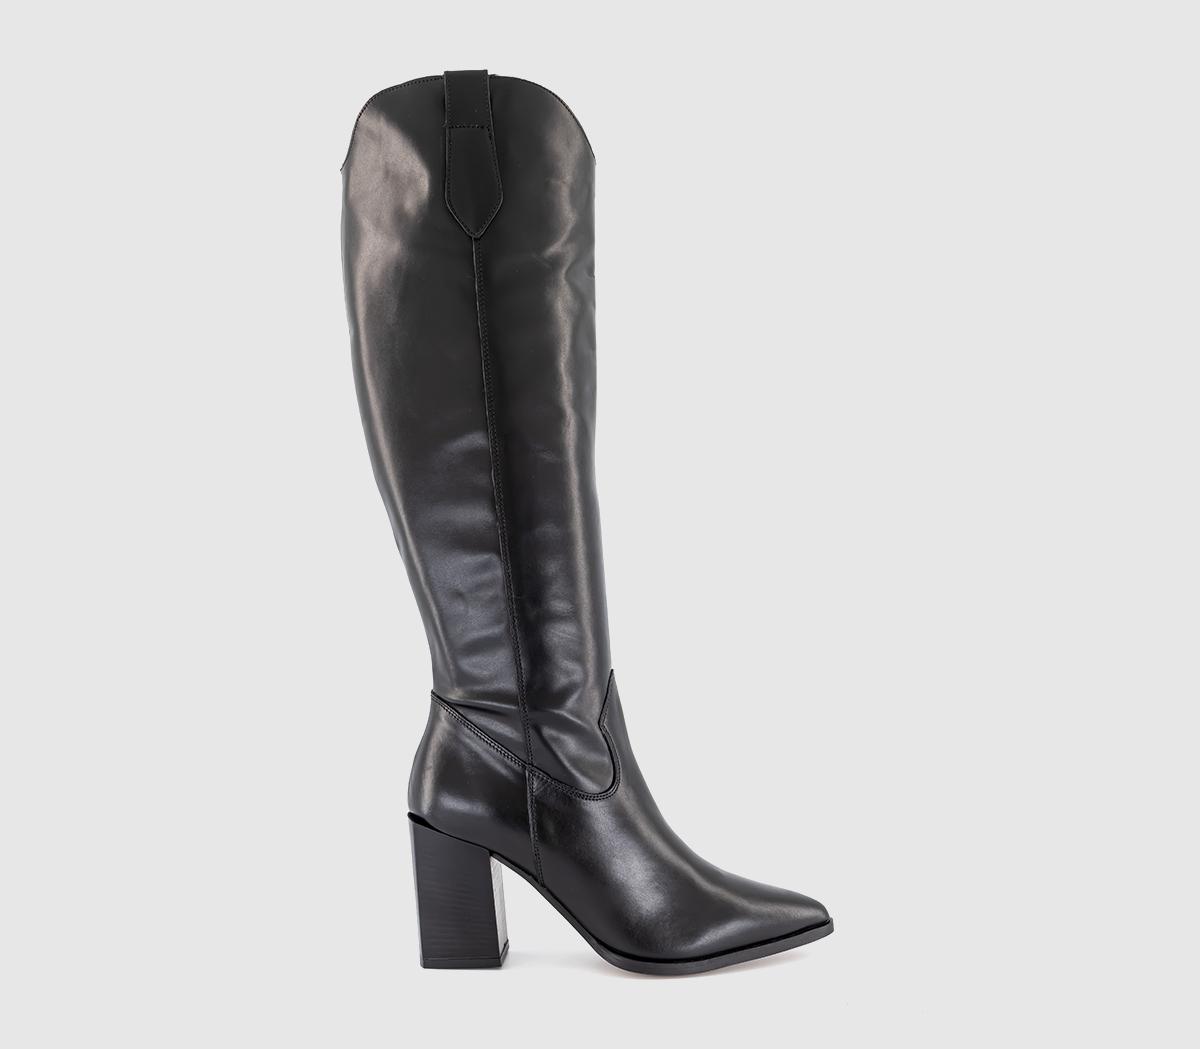 OFFICE Katarina Slouch Western Knee Boots Black Leather - Knee High Boots